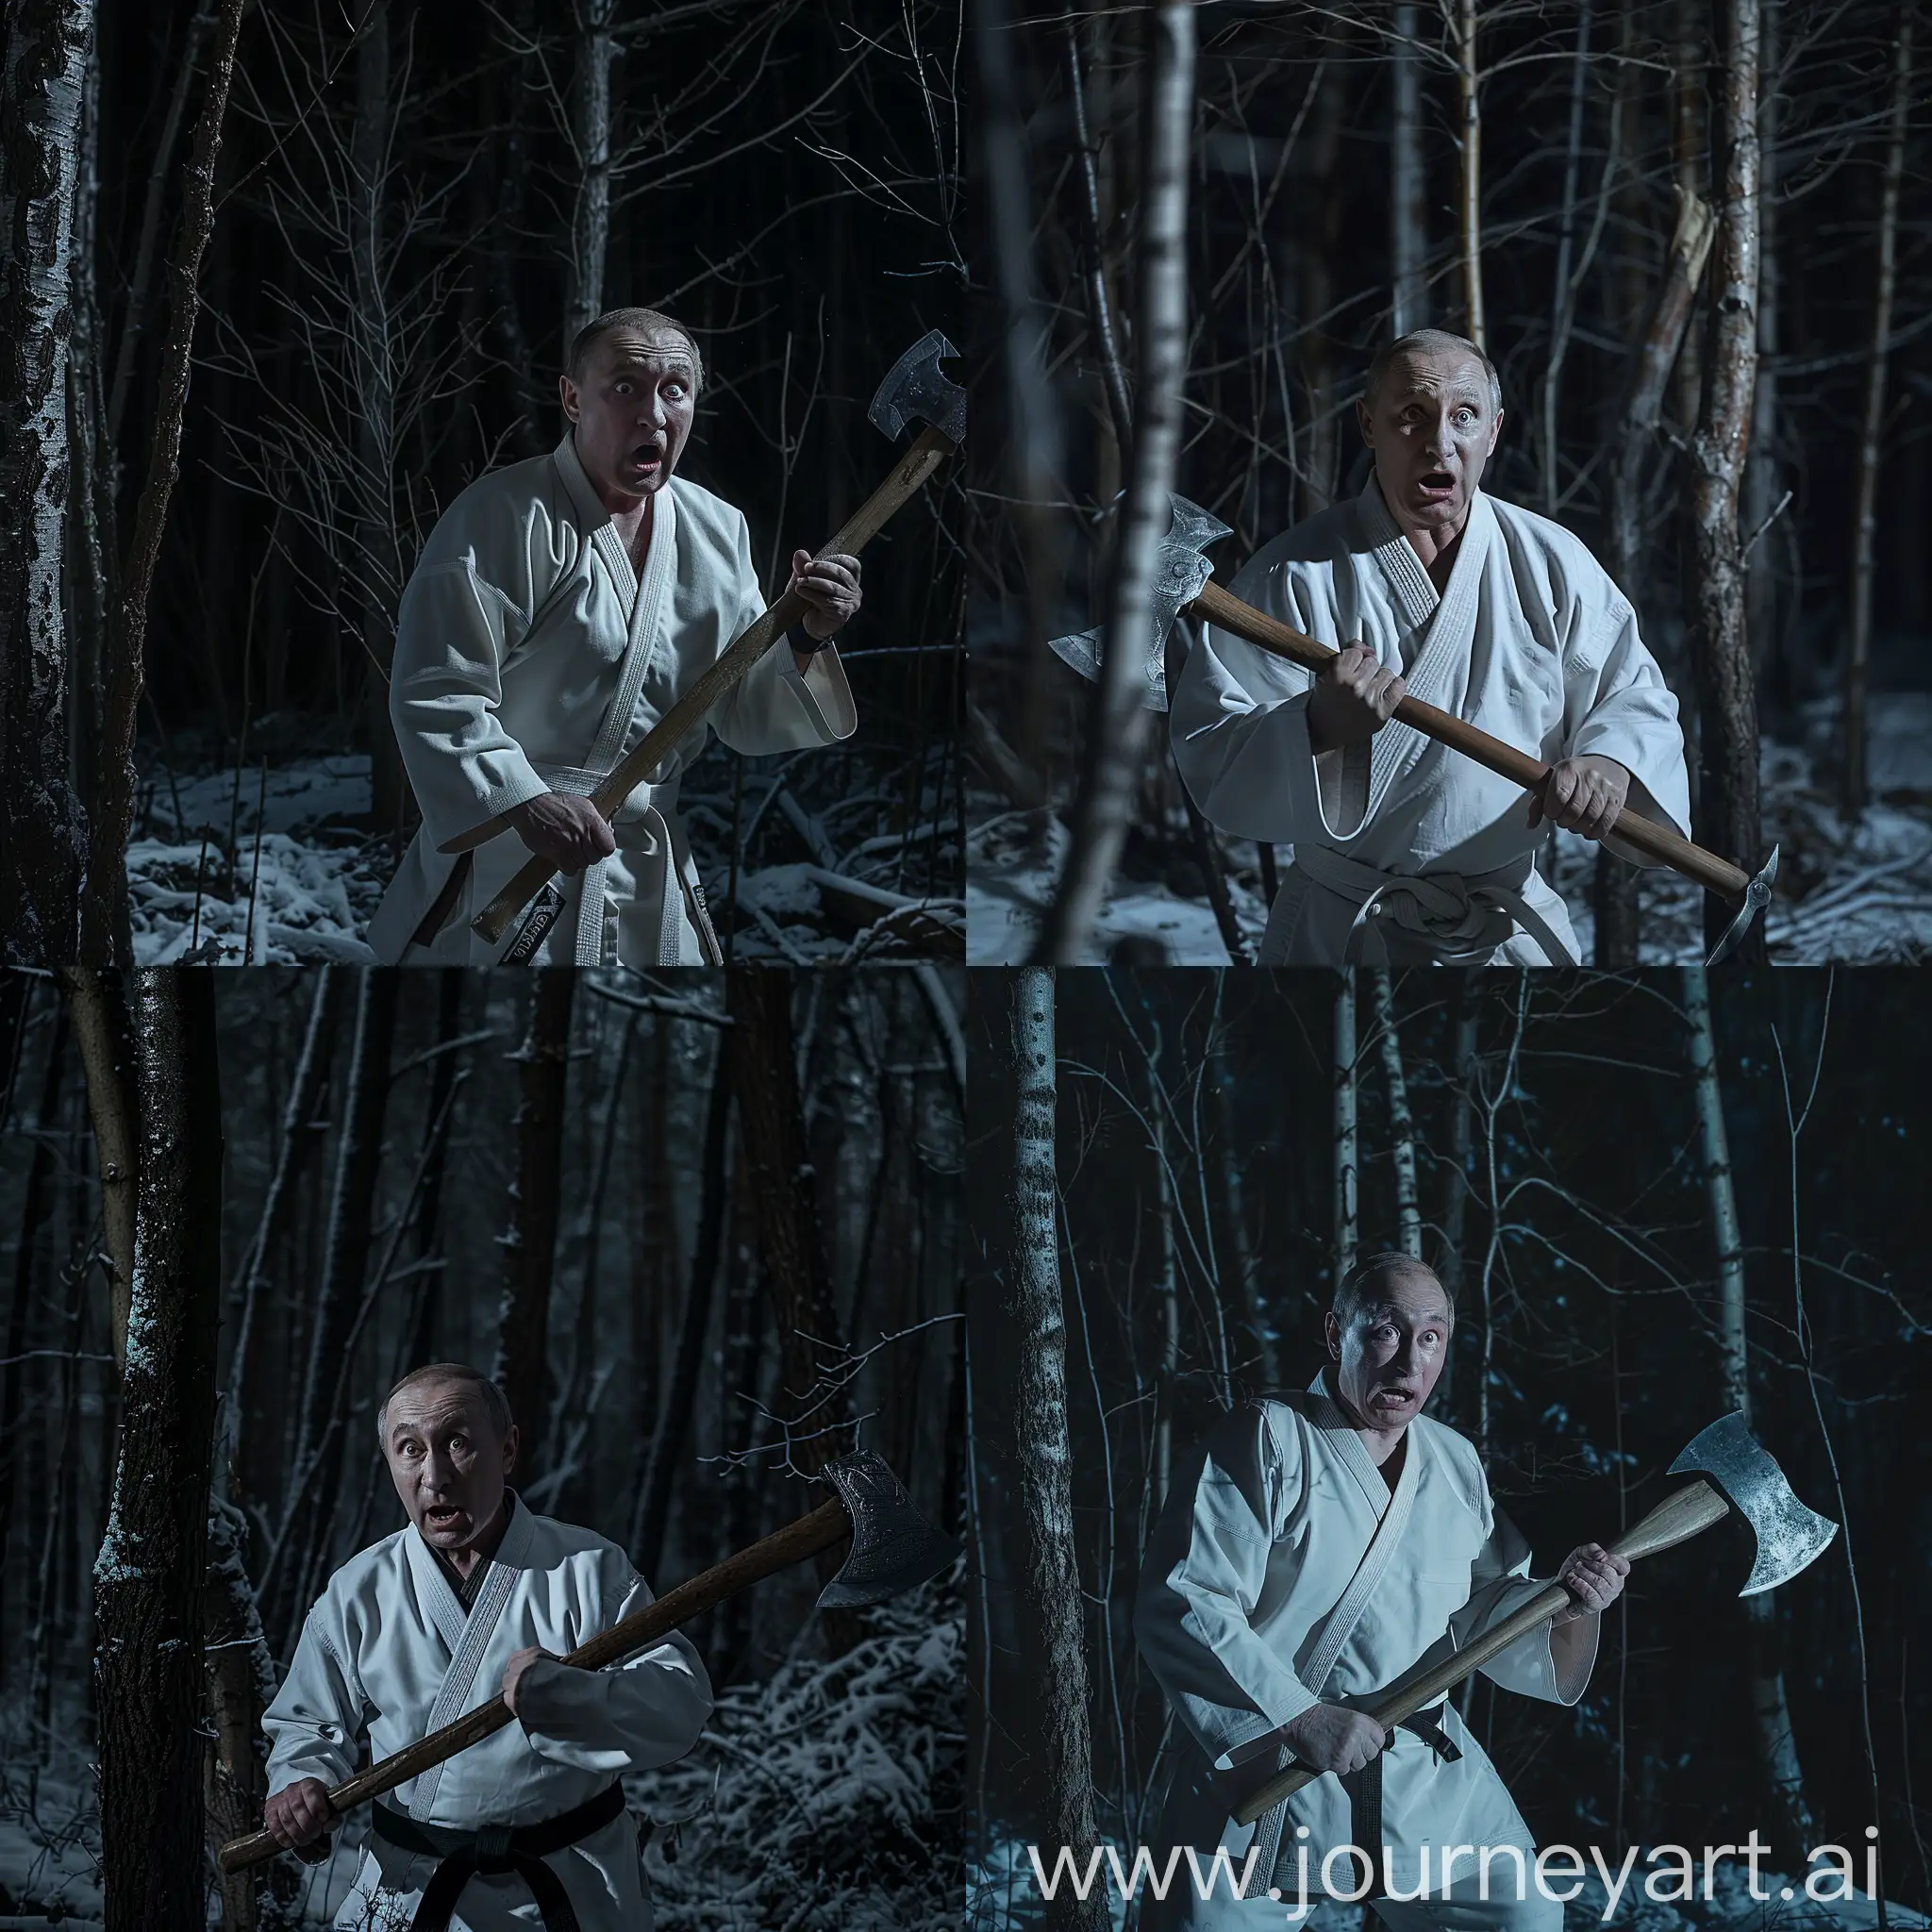 Putin-in-Dark-Eerie-Forest-Shocked-Wideeyed-Expression-with-Axe